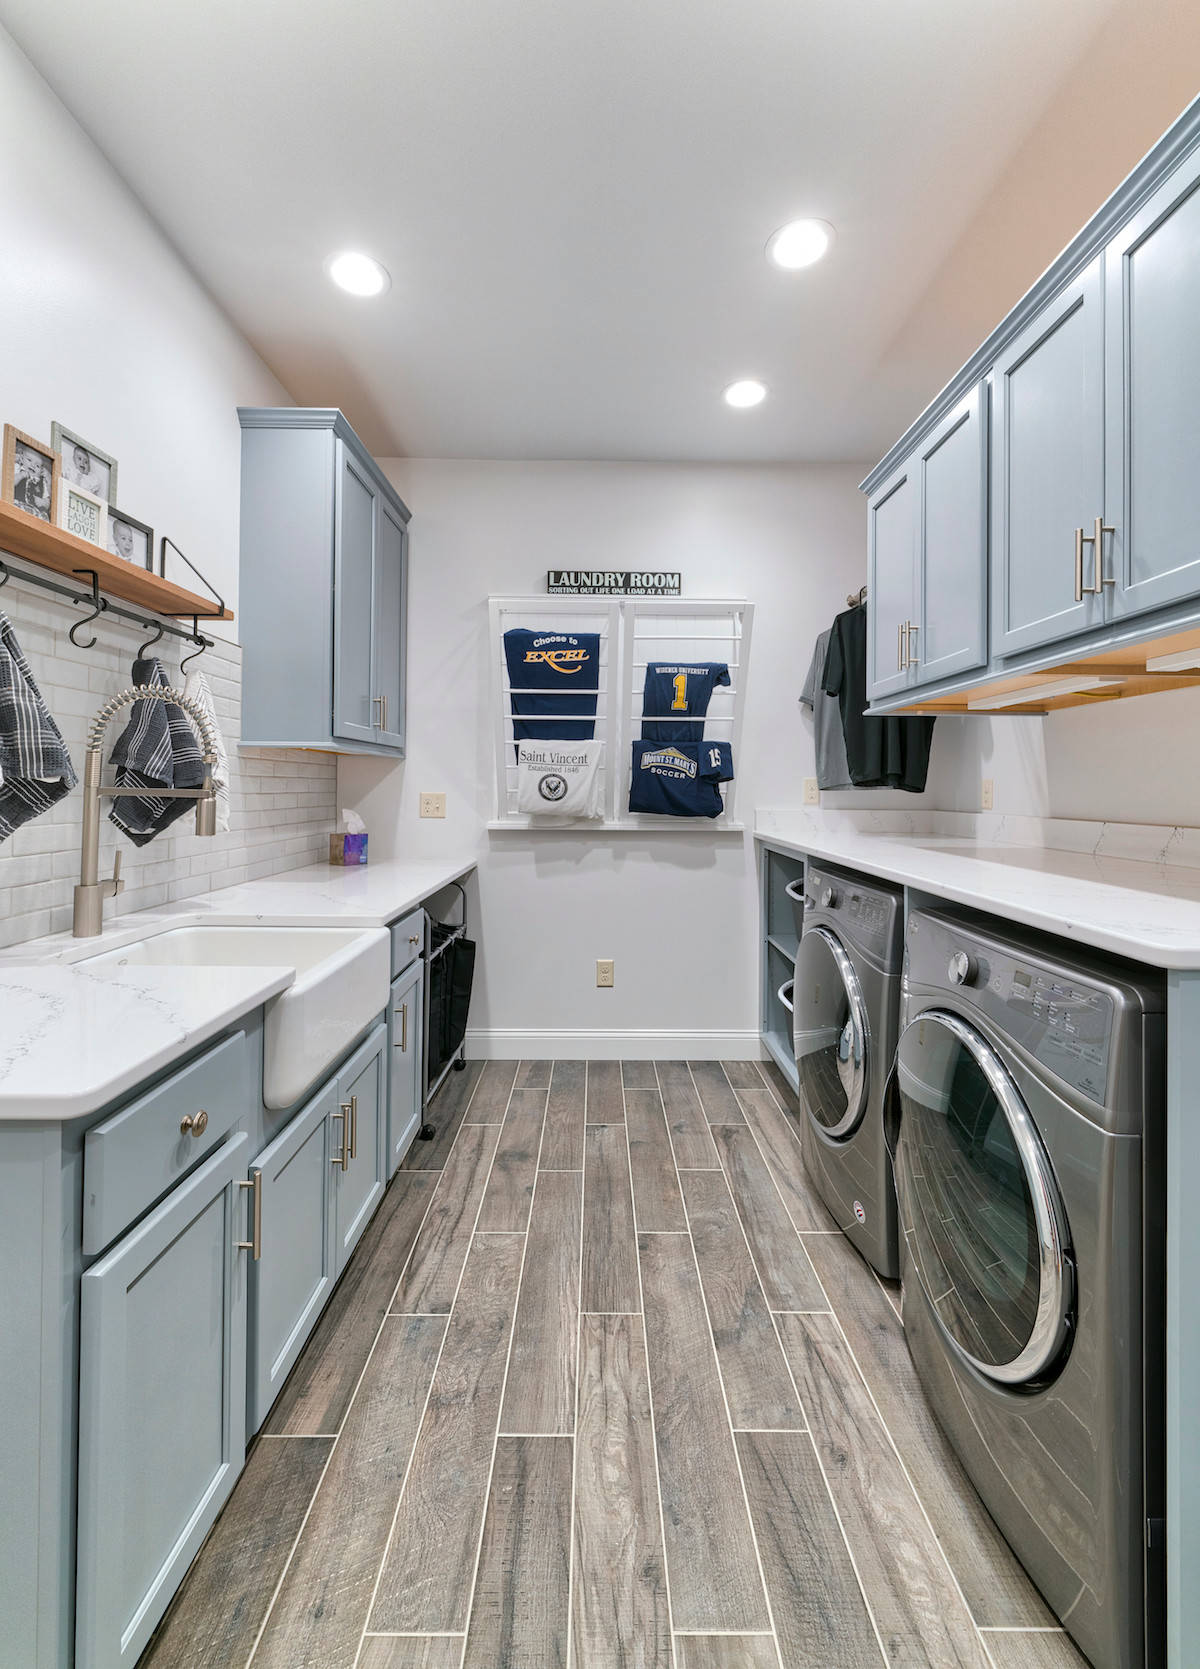 Farmhouse Sink with Gray Laundry Room Cabinets - Transitional - Laundry Room